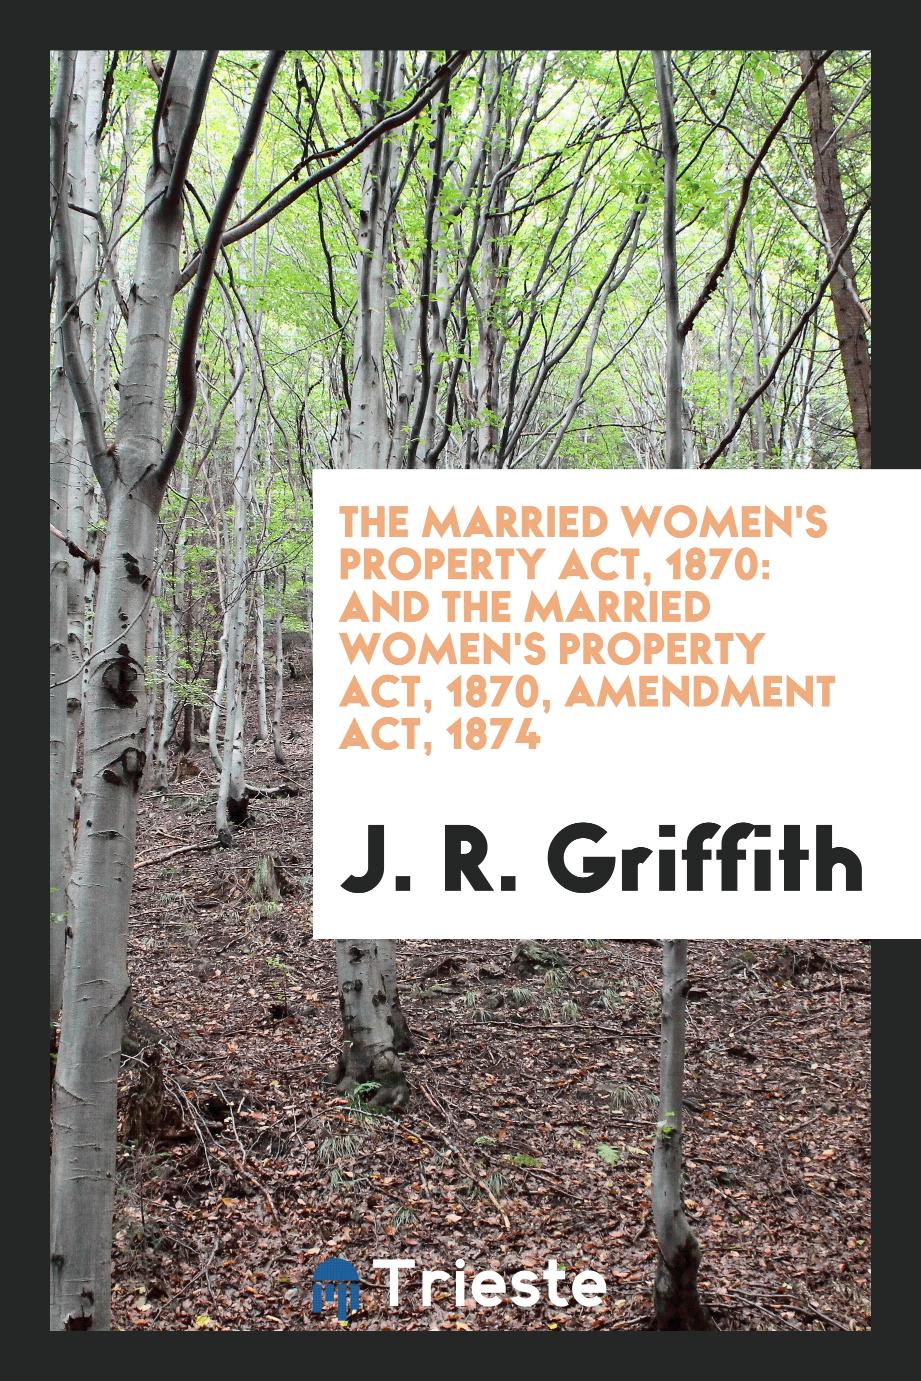 The Married Women's Property Act, 1870: And the Married Women's Property Act, 1870, Amendment Act, 1874